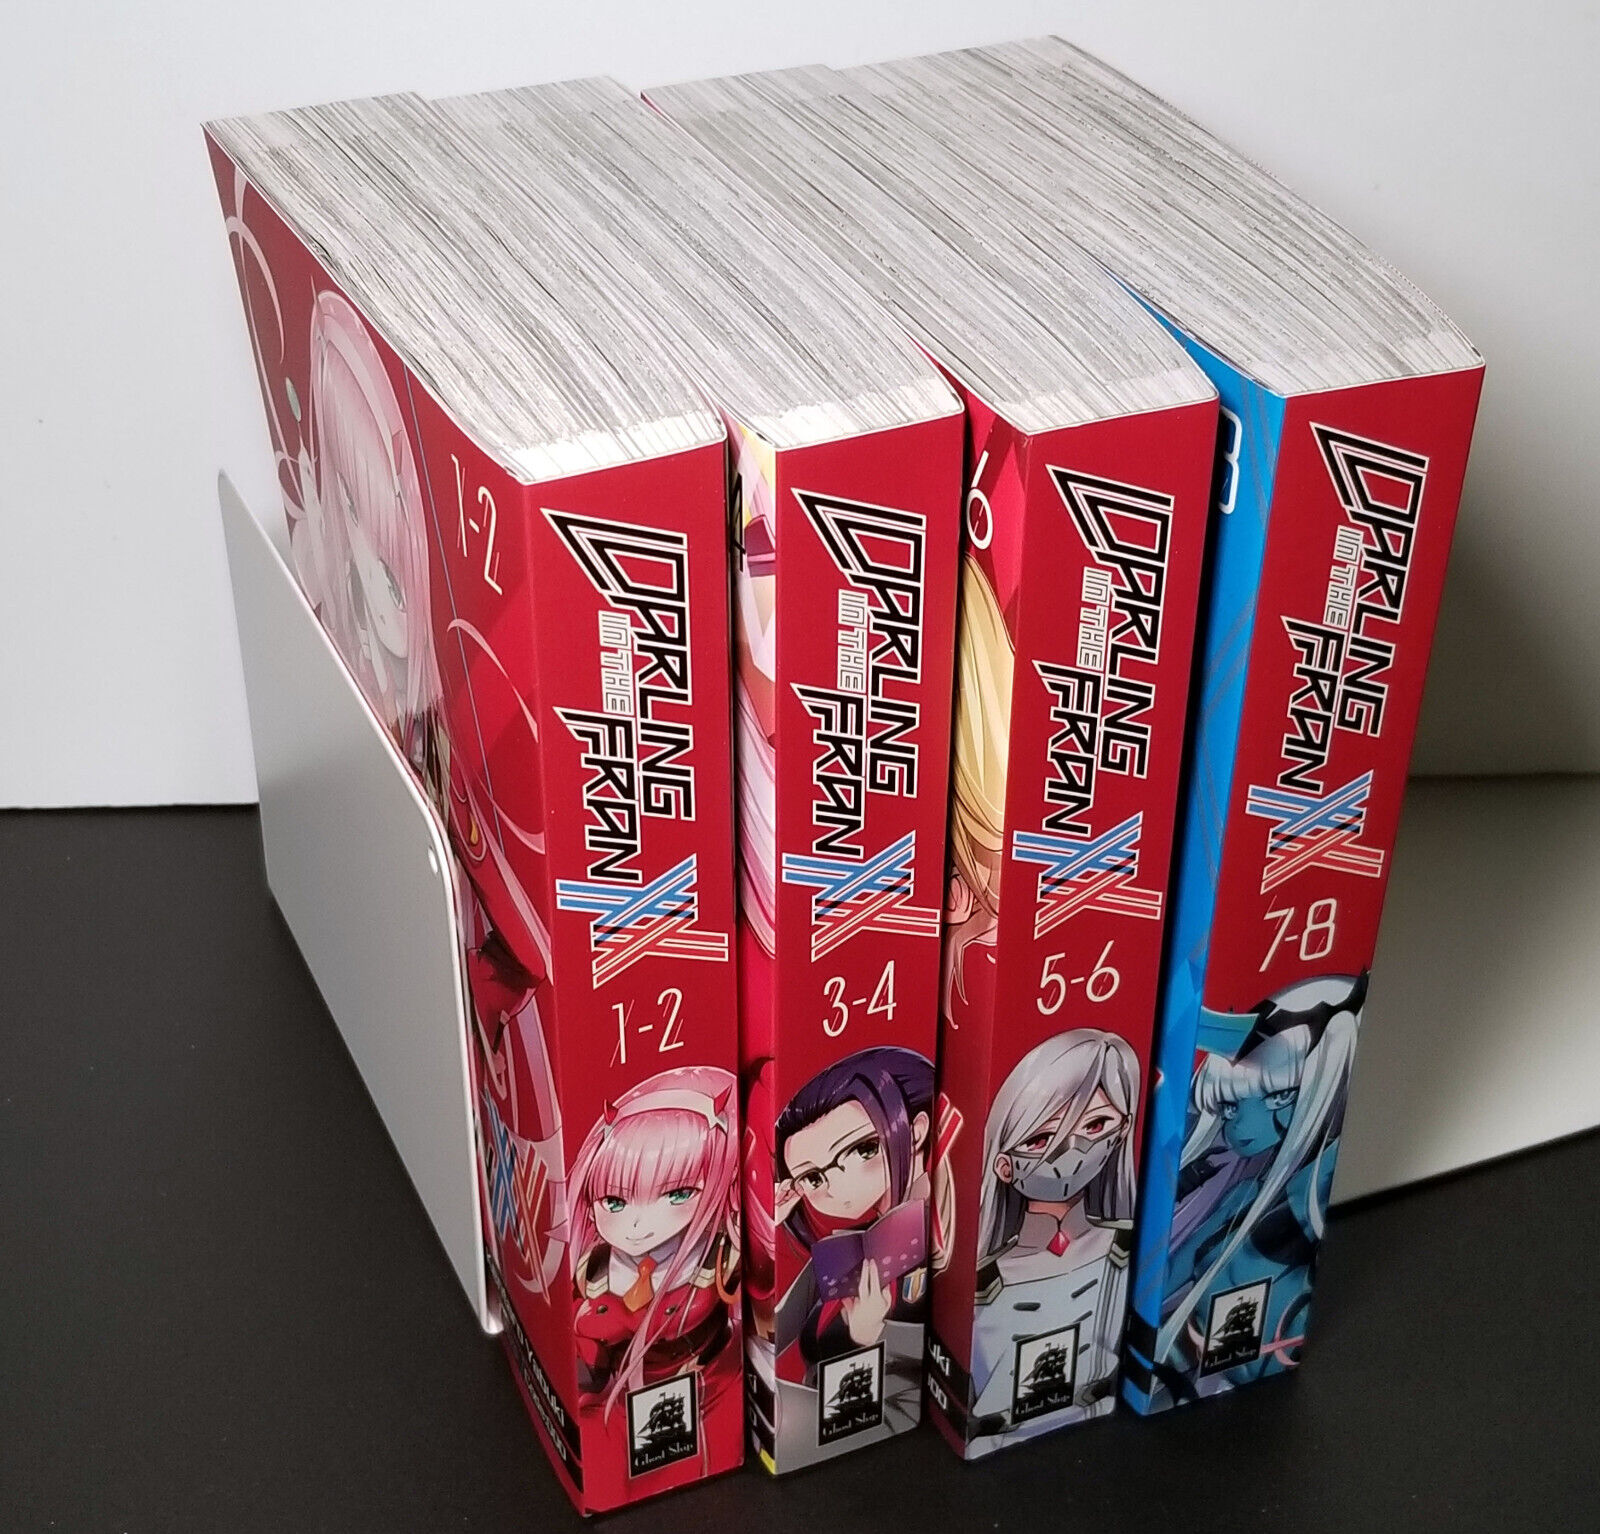 Darling in the Franxx English Manga Complete Set First Print Volumes 1-8